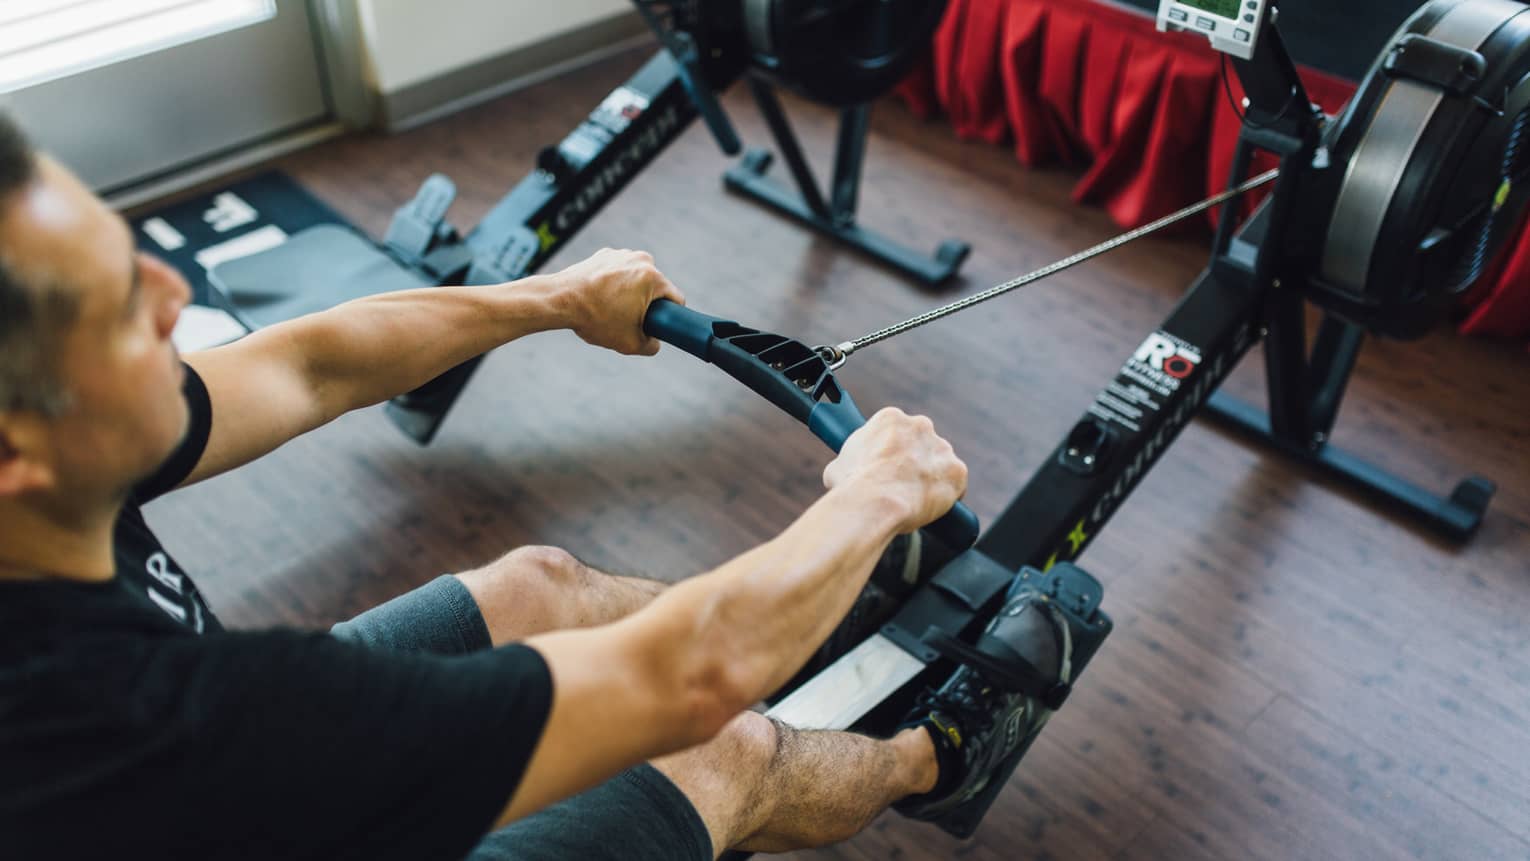 Man sits, pulls handle of cardio rowing machine in fitness facility